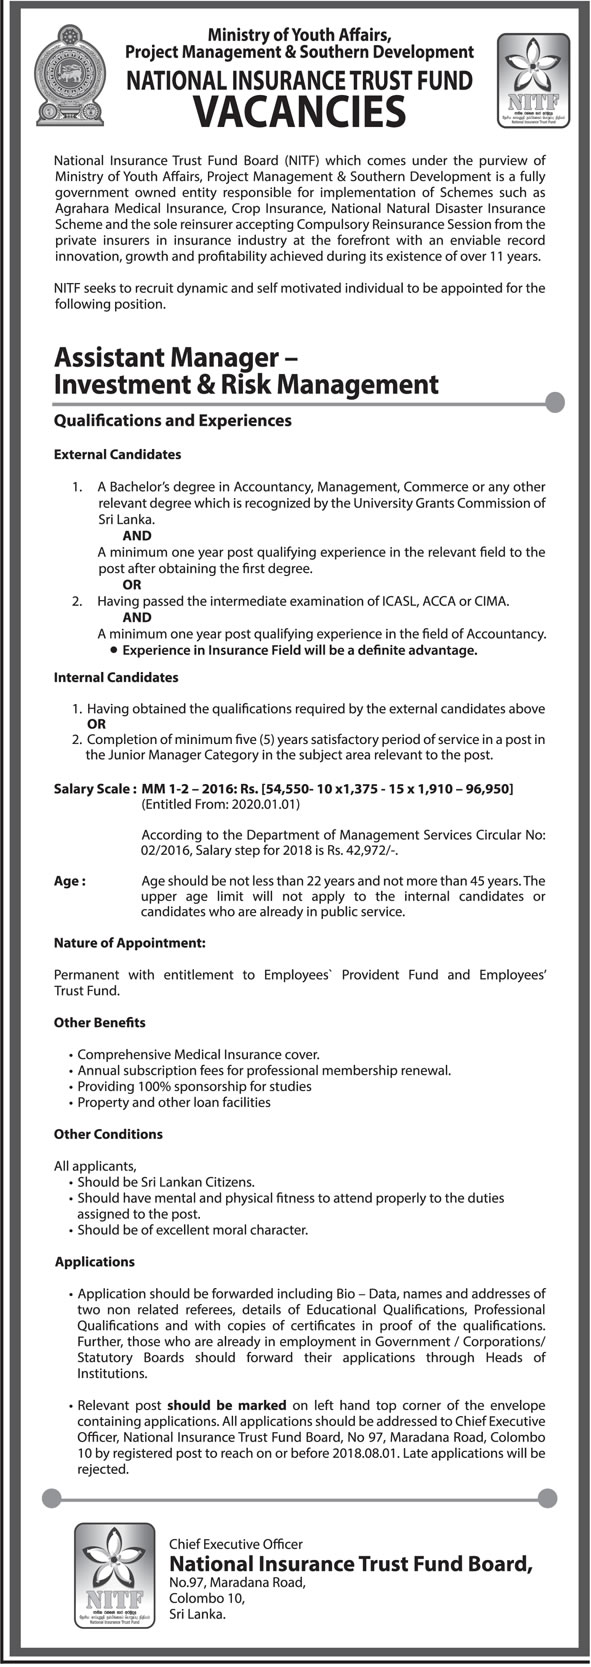 Assistant Manager (Investment & Risk Management) - National Insurance Trust Fund Board Jobs Vacancies